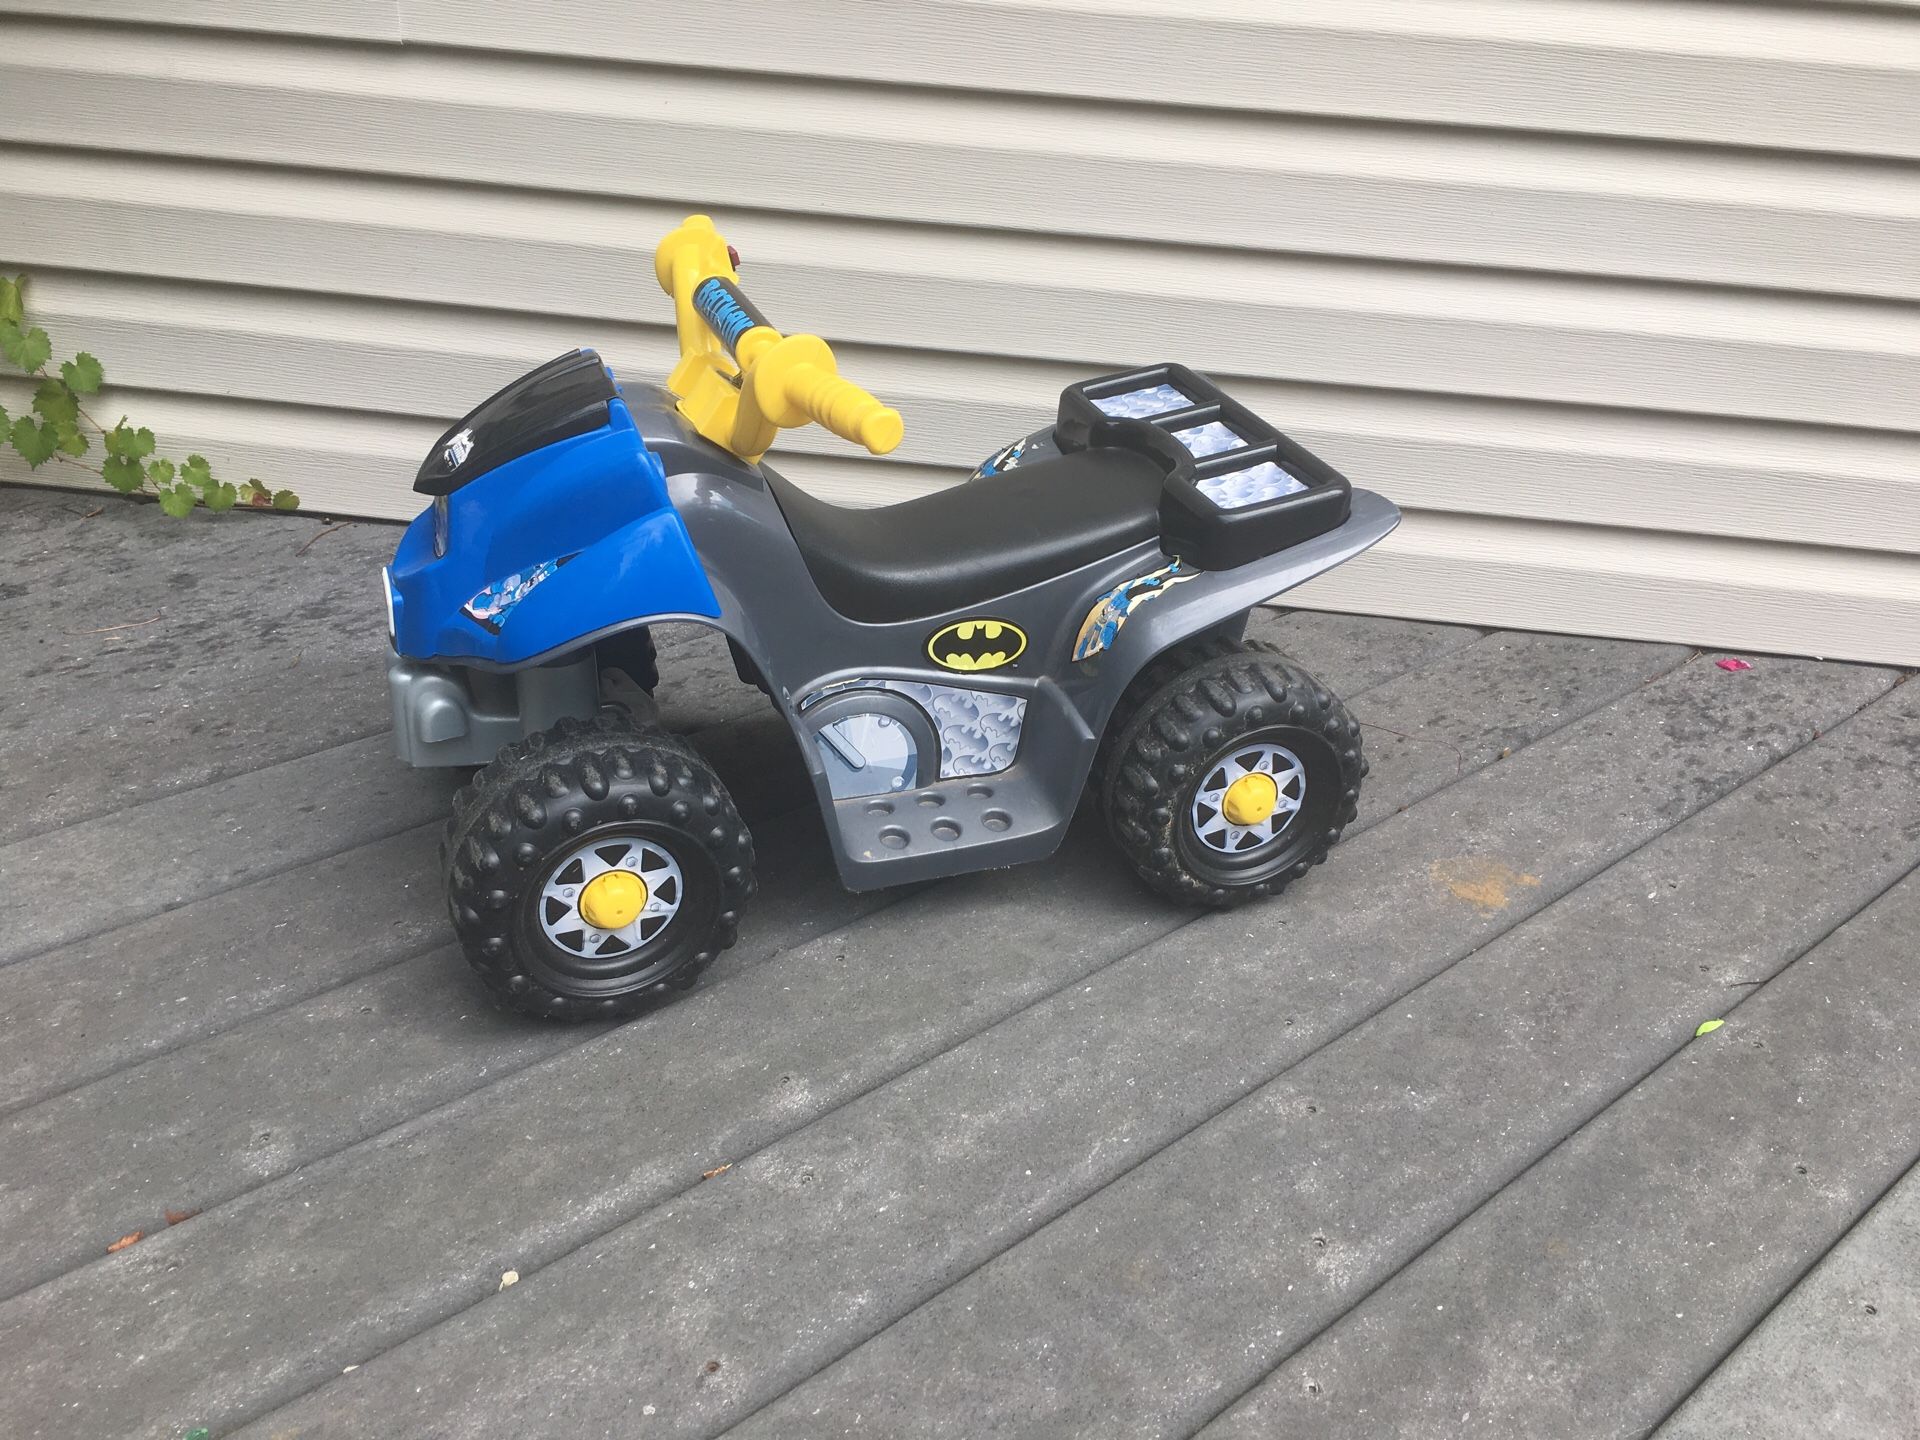 Fisher Price Power Wheels Lil' Quad 6 V ATV Ride On Toy with Battery & Charger. Good working condition